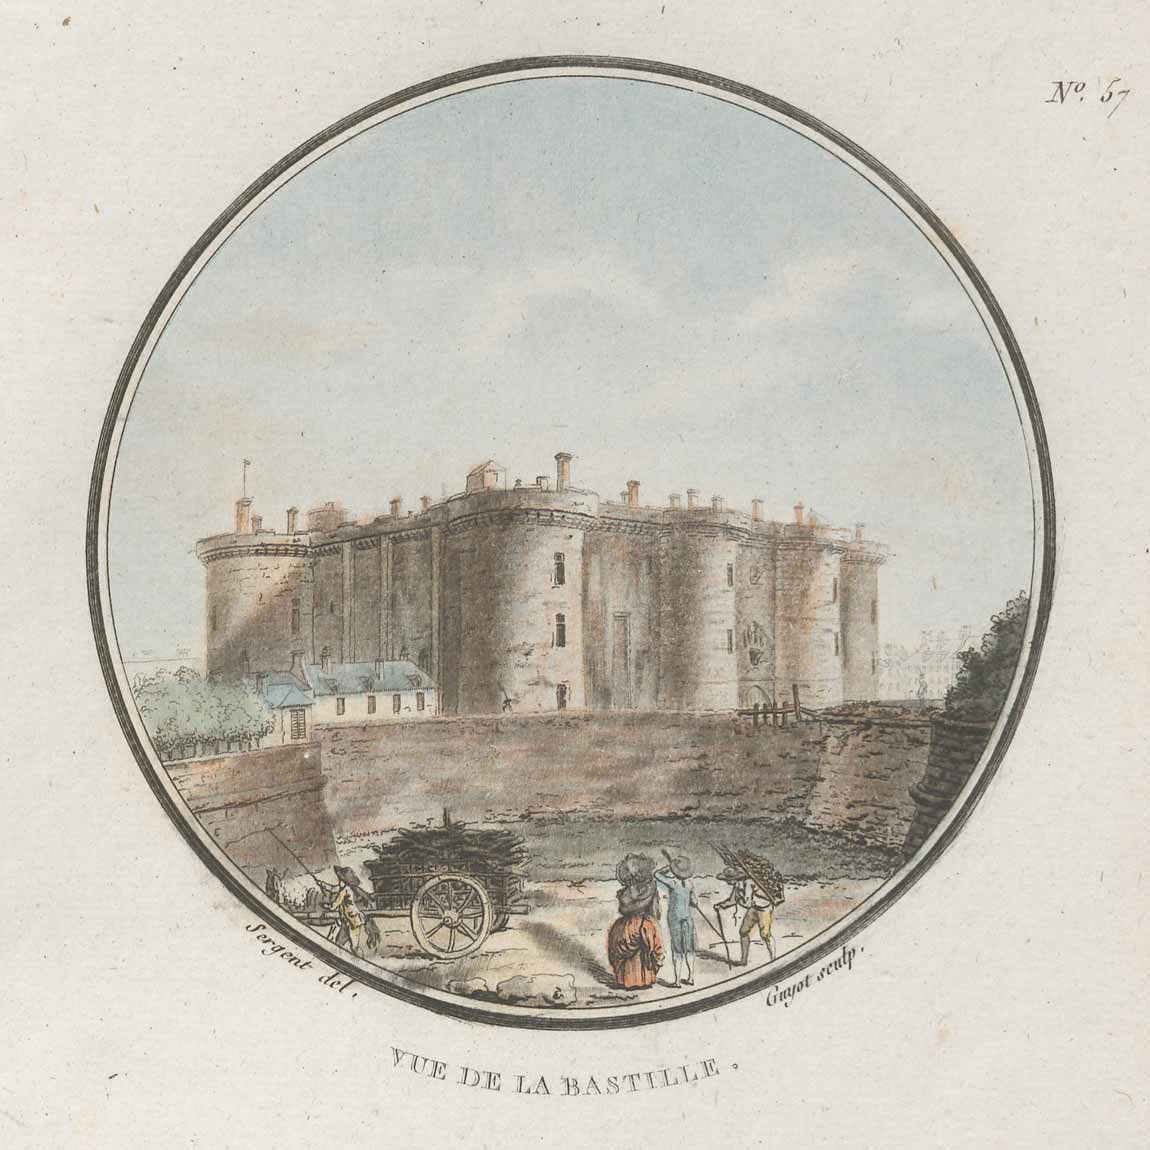 Aquatint engraving of the Bastille enclosed in a circle border, showing workers and observers outside of the prison’s walls